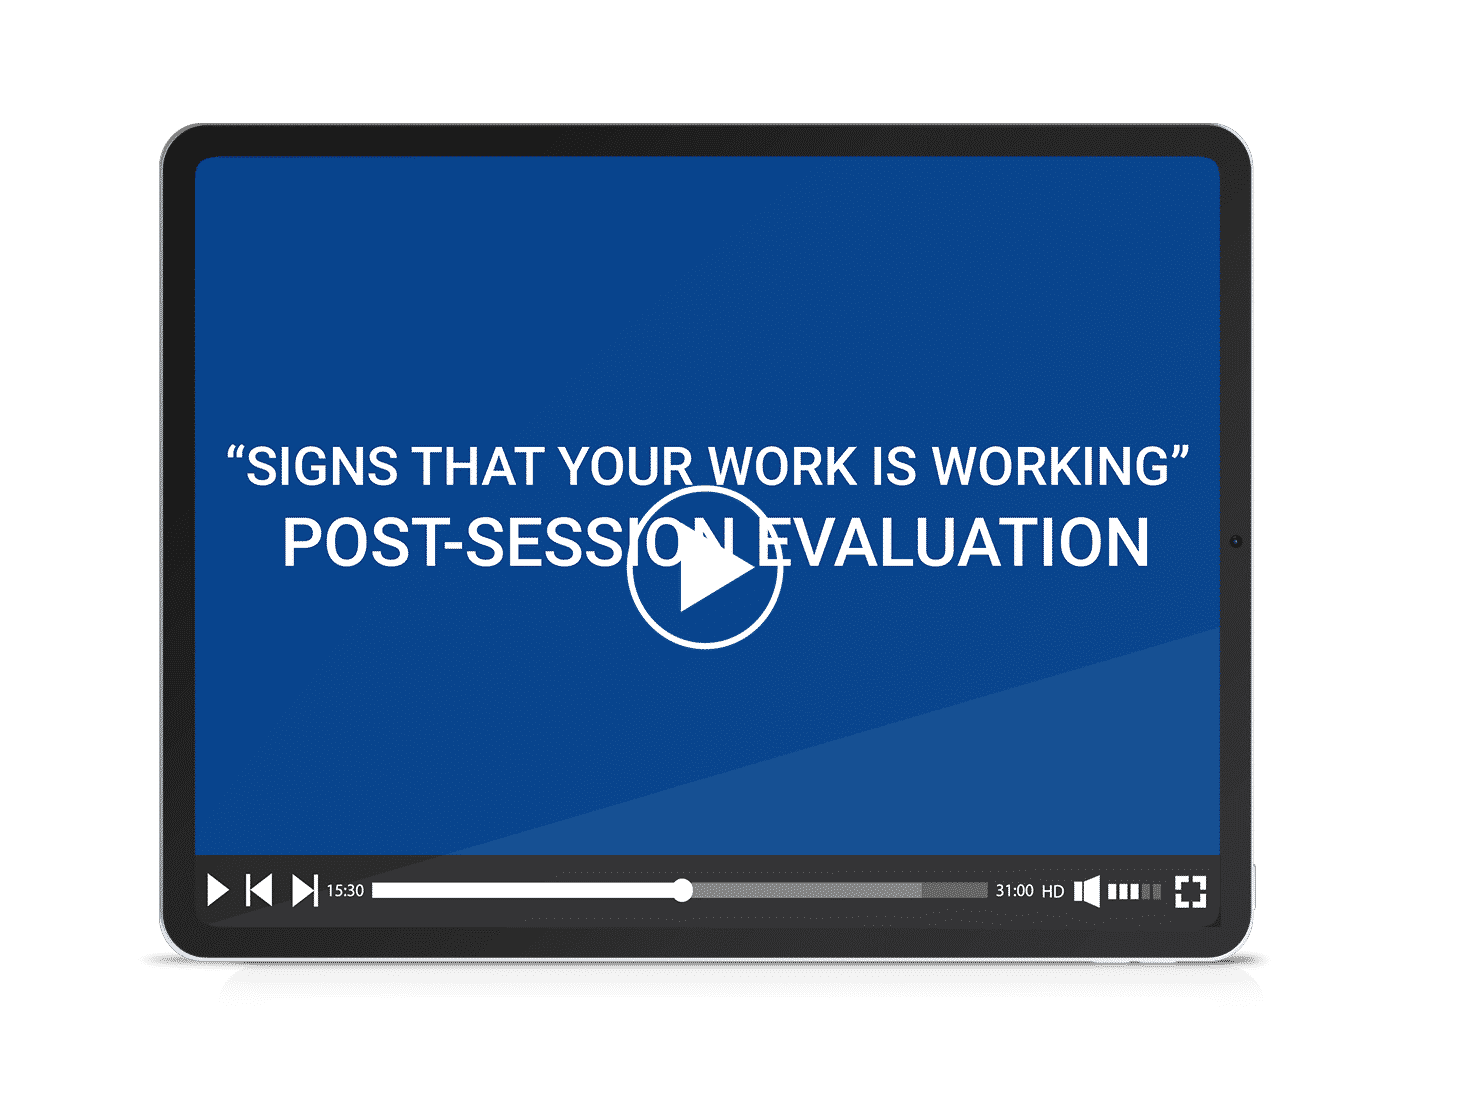 6. Signs that your work is working post-session evaluation